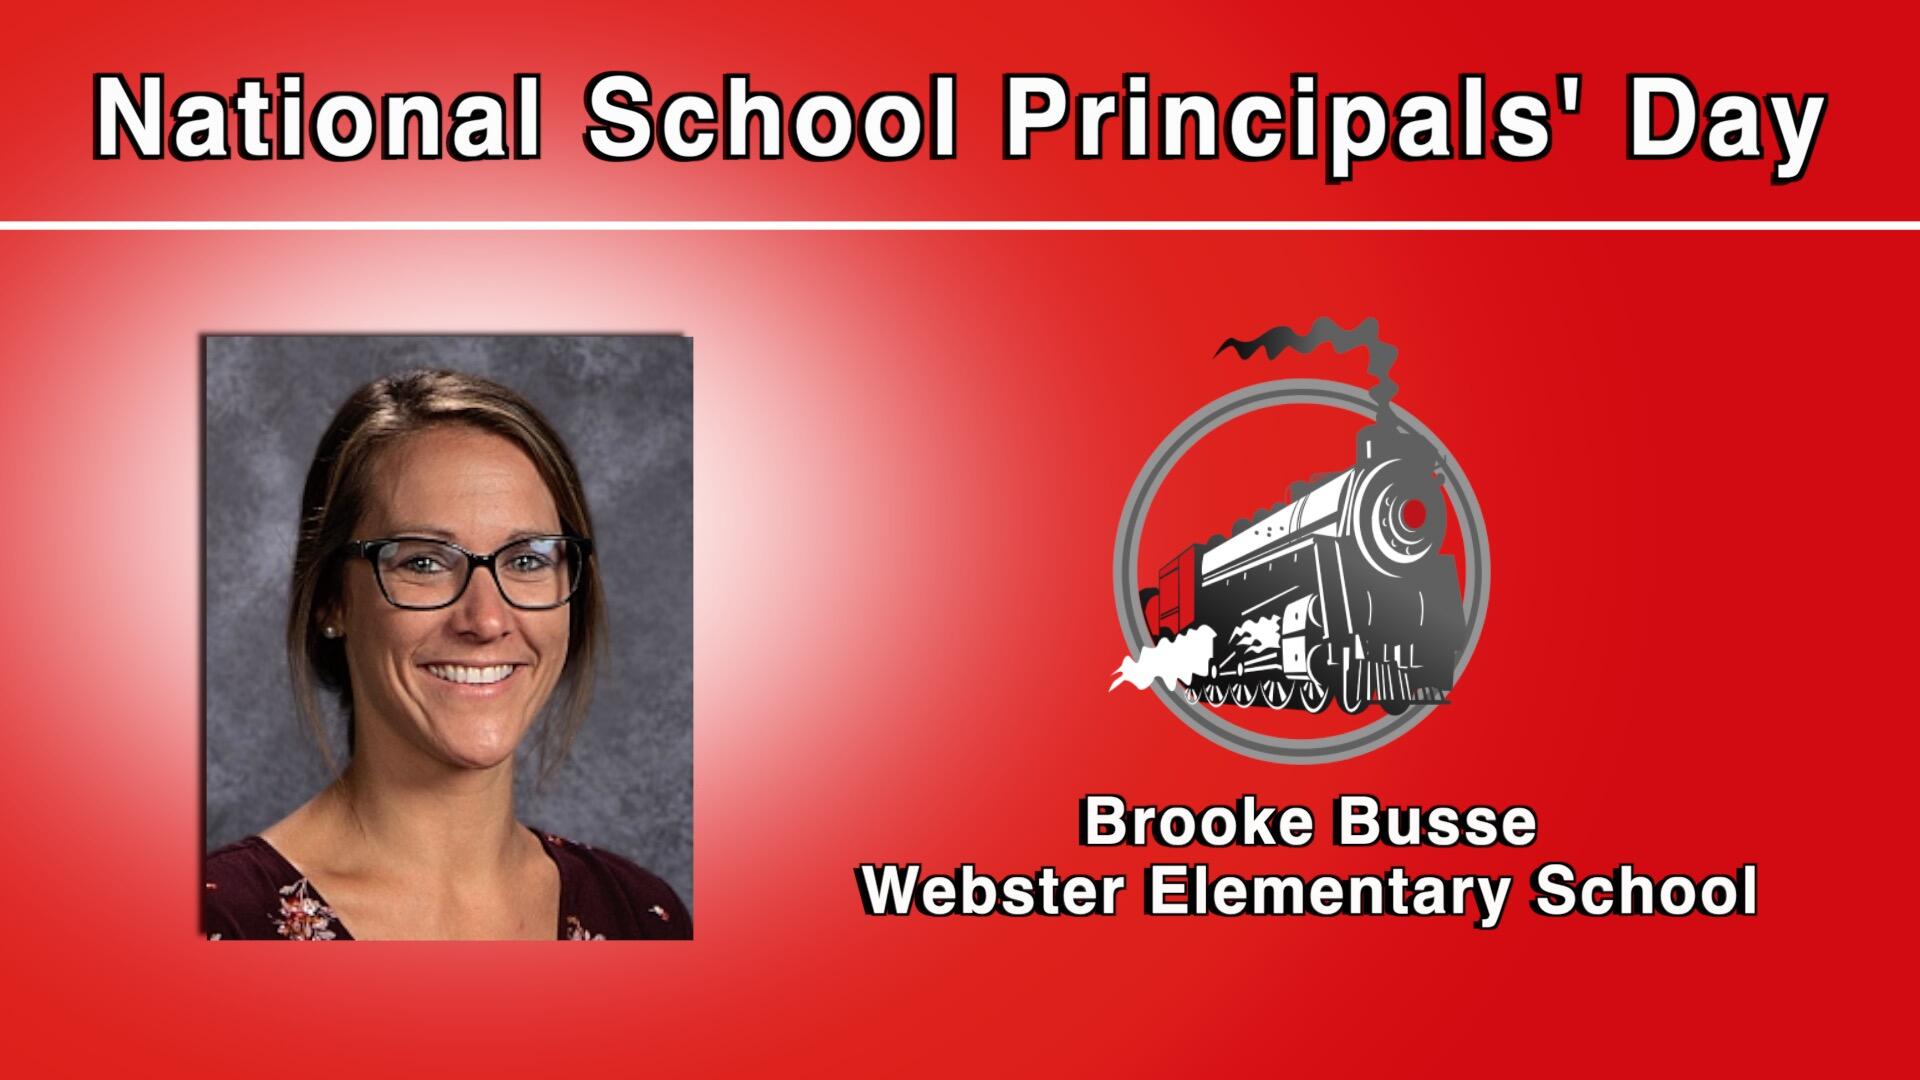 National School Principals' Day - Brooke Busse- Webster Elementary School and logo